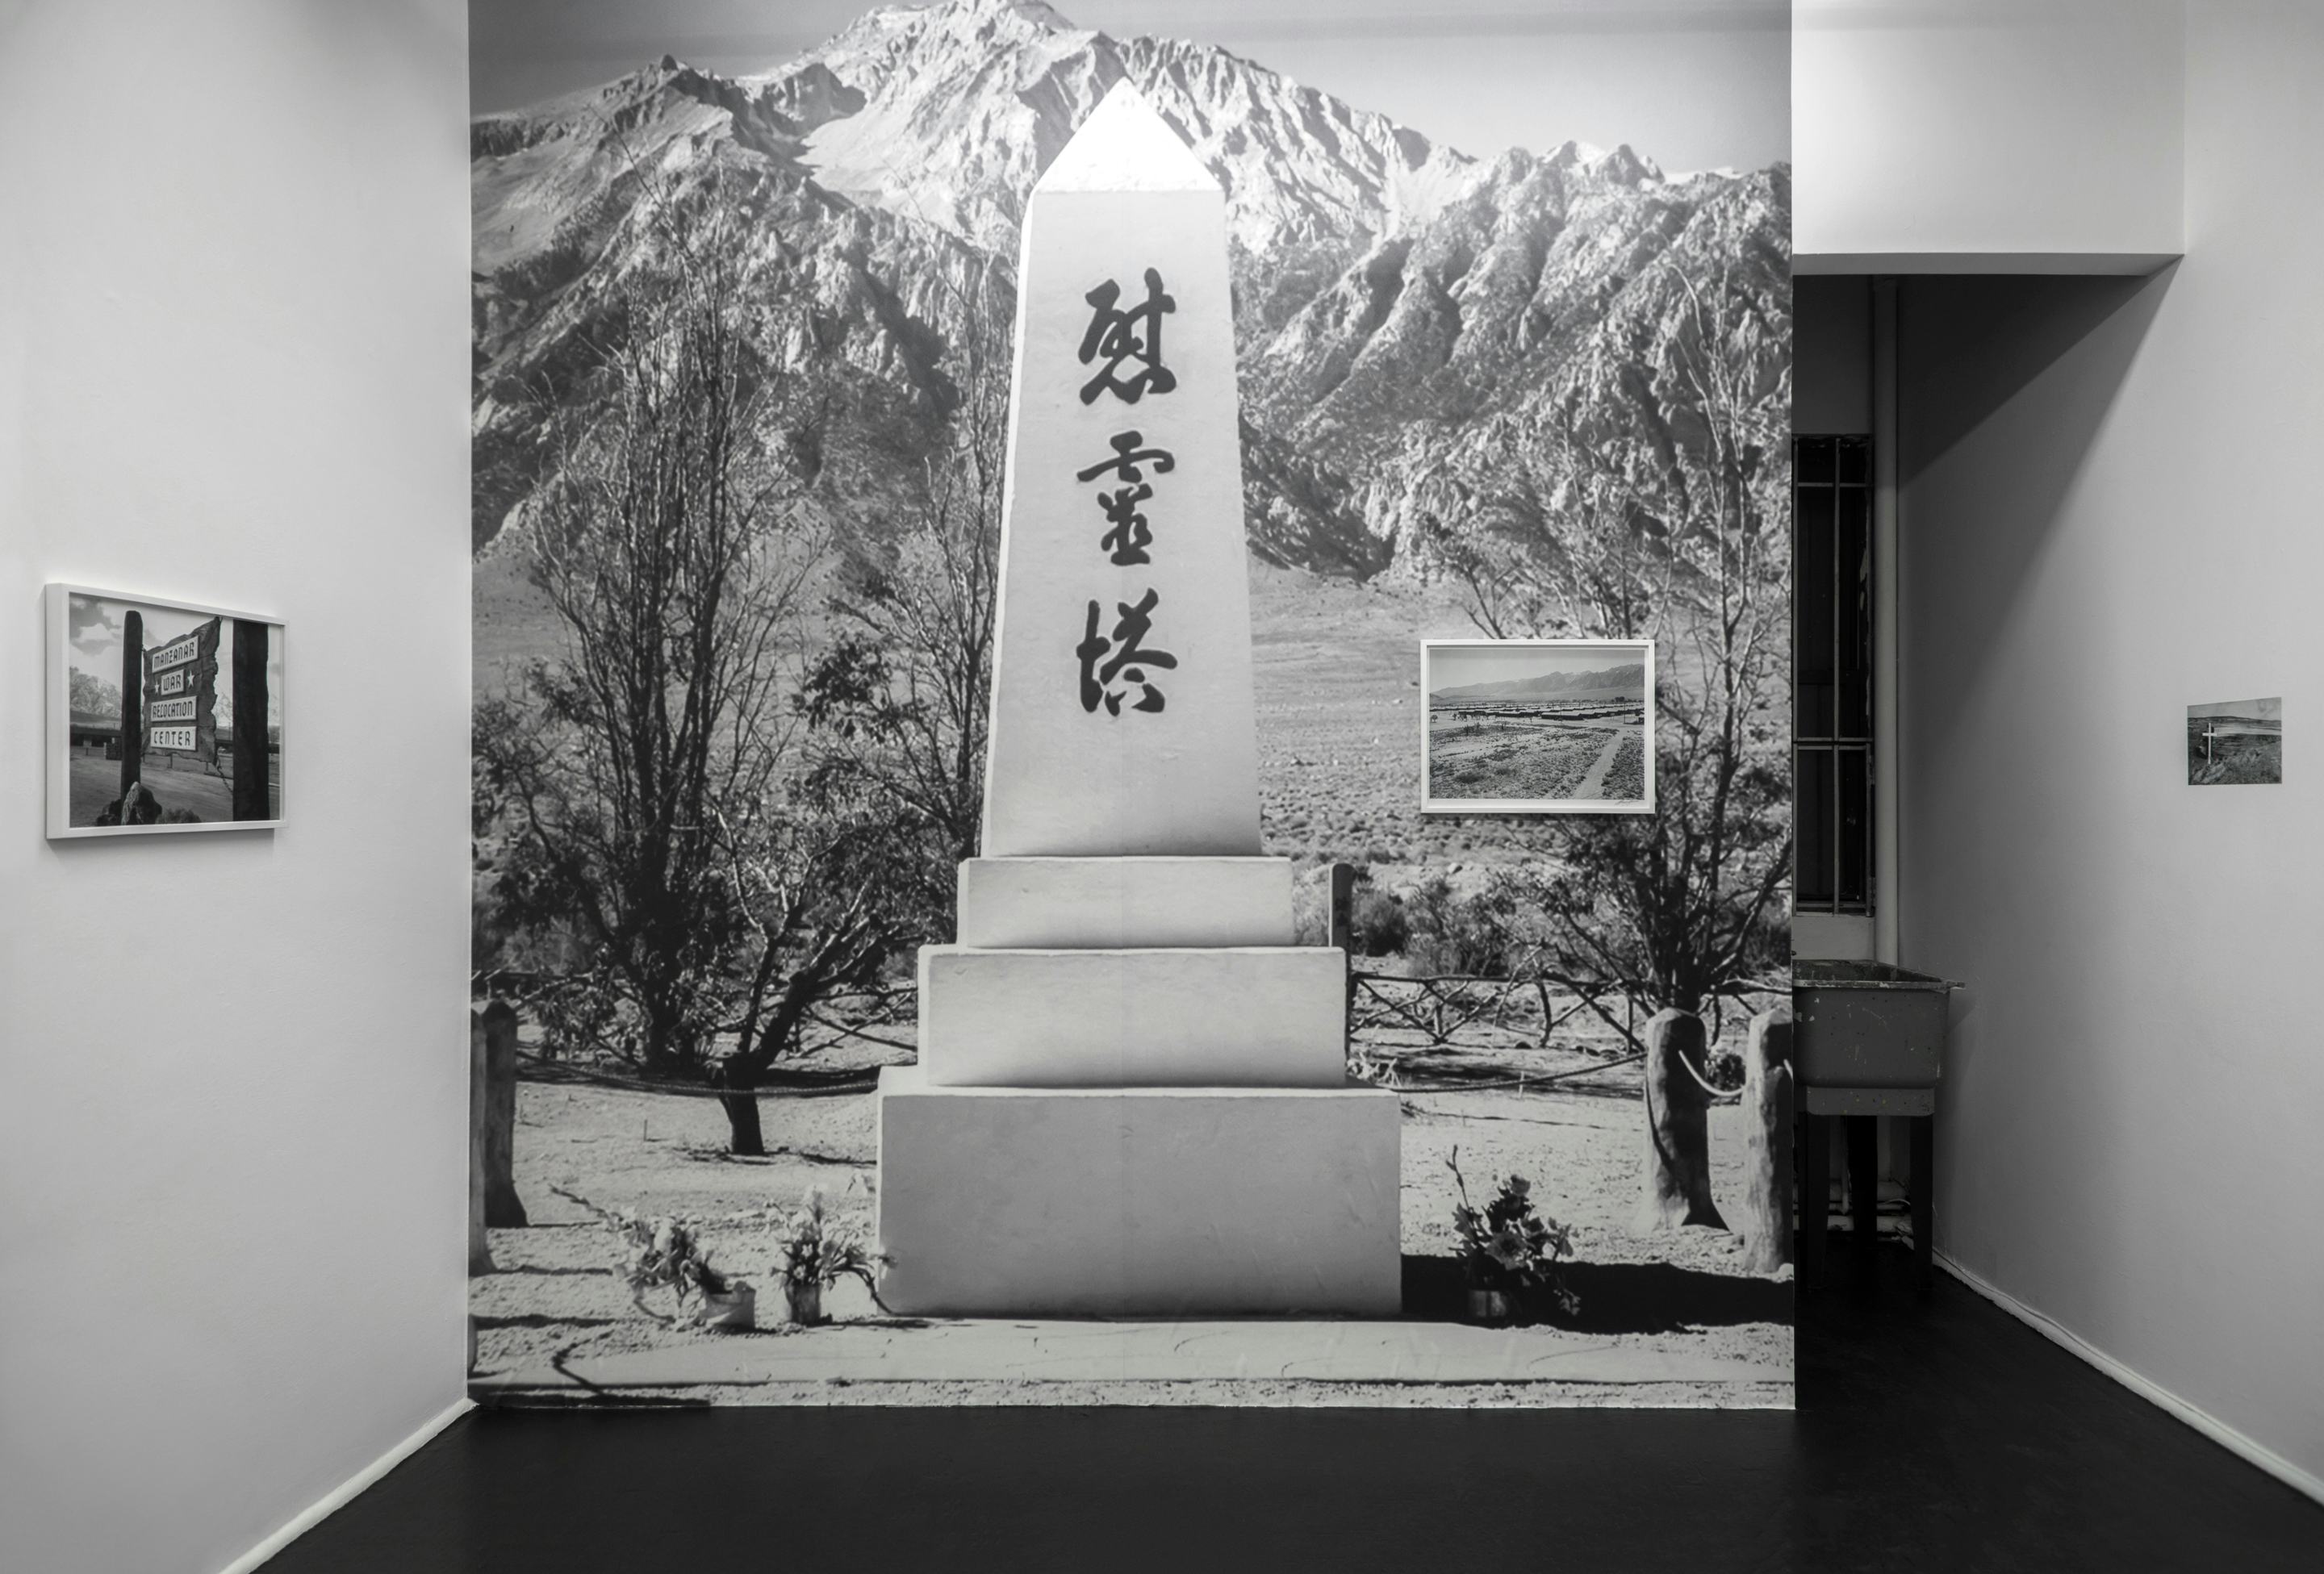 Ansel Adams, Monument in cemetery, 1943 (Scanned Reproduction)(Sherrie Levine After Walker Evans)(Proposal for a Soul Consoling Tower in Various Locations Around the World)(Soul Consoling Tower) (2019)
Fabric photo mural. 

126h x 113w inches